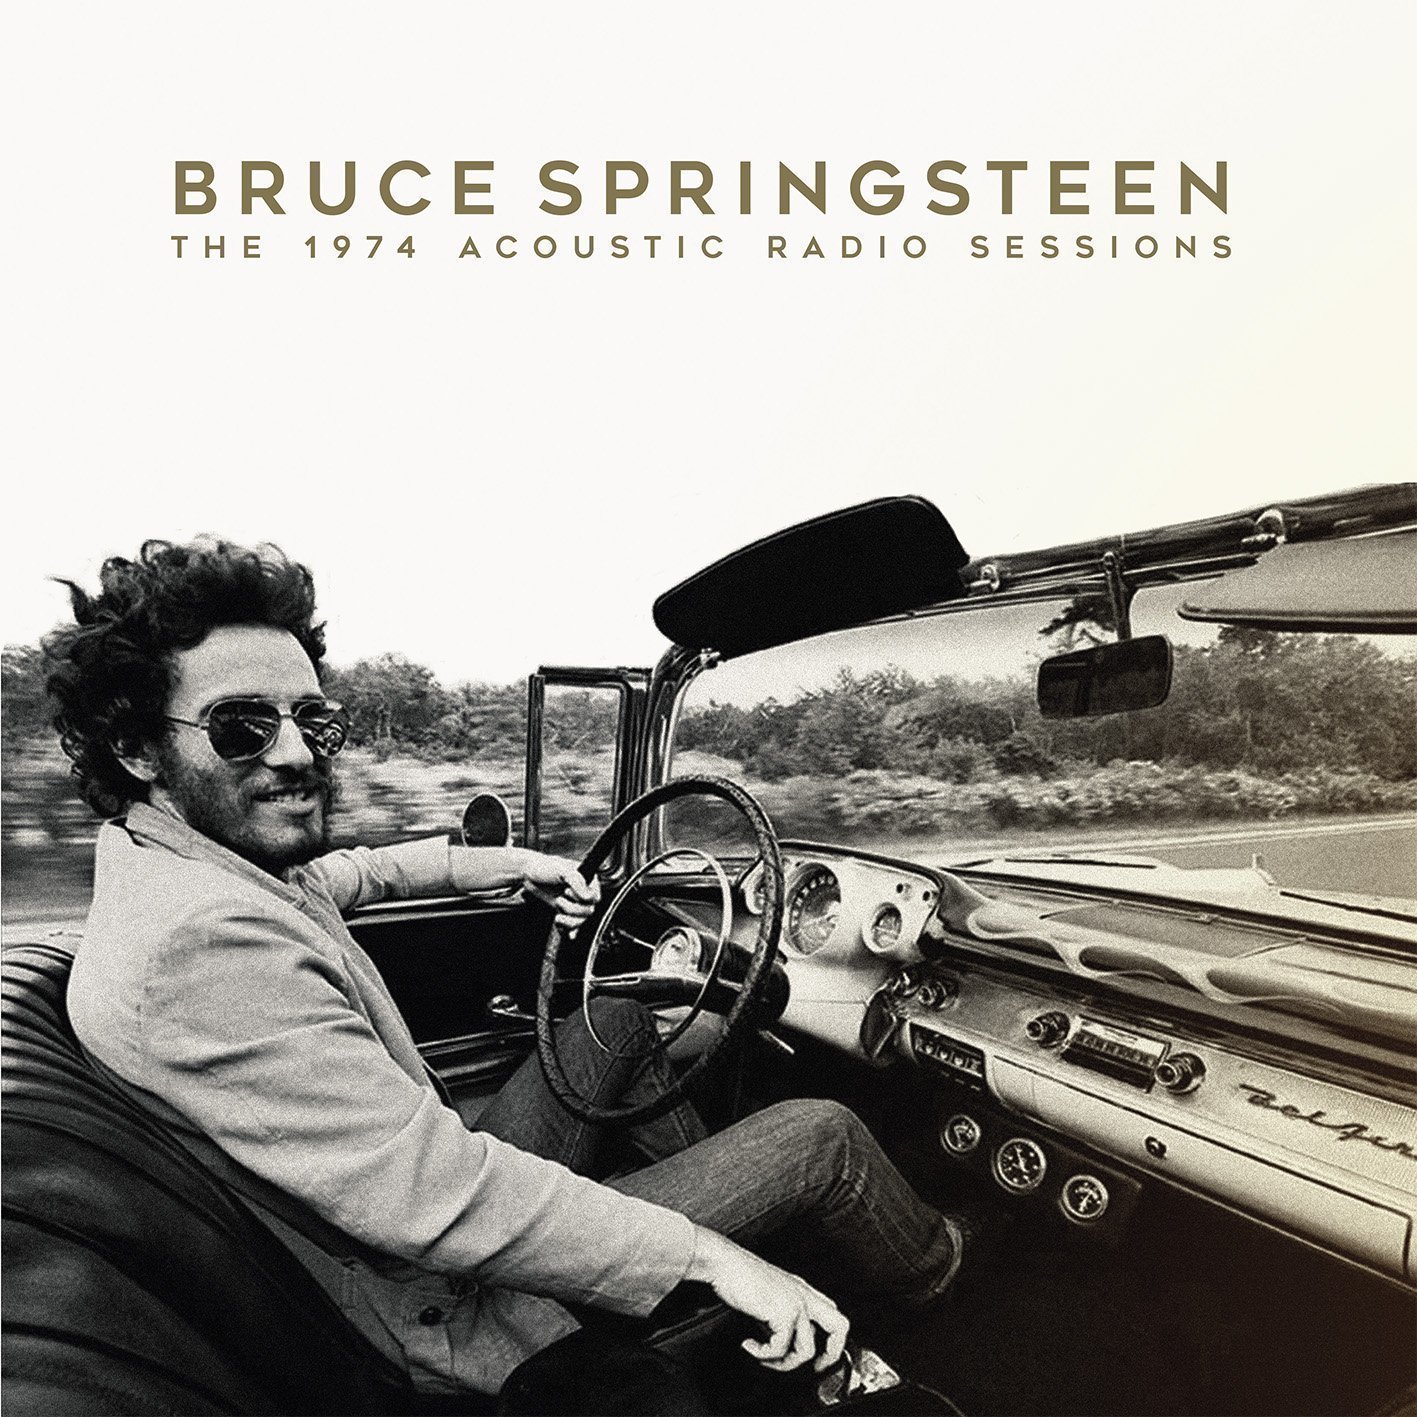 Bruce Springsteen - The 1974 Acoustic Radio Sessions (2 LP) Bruce Springsteen